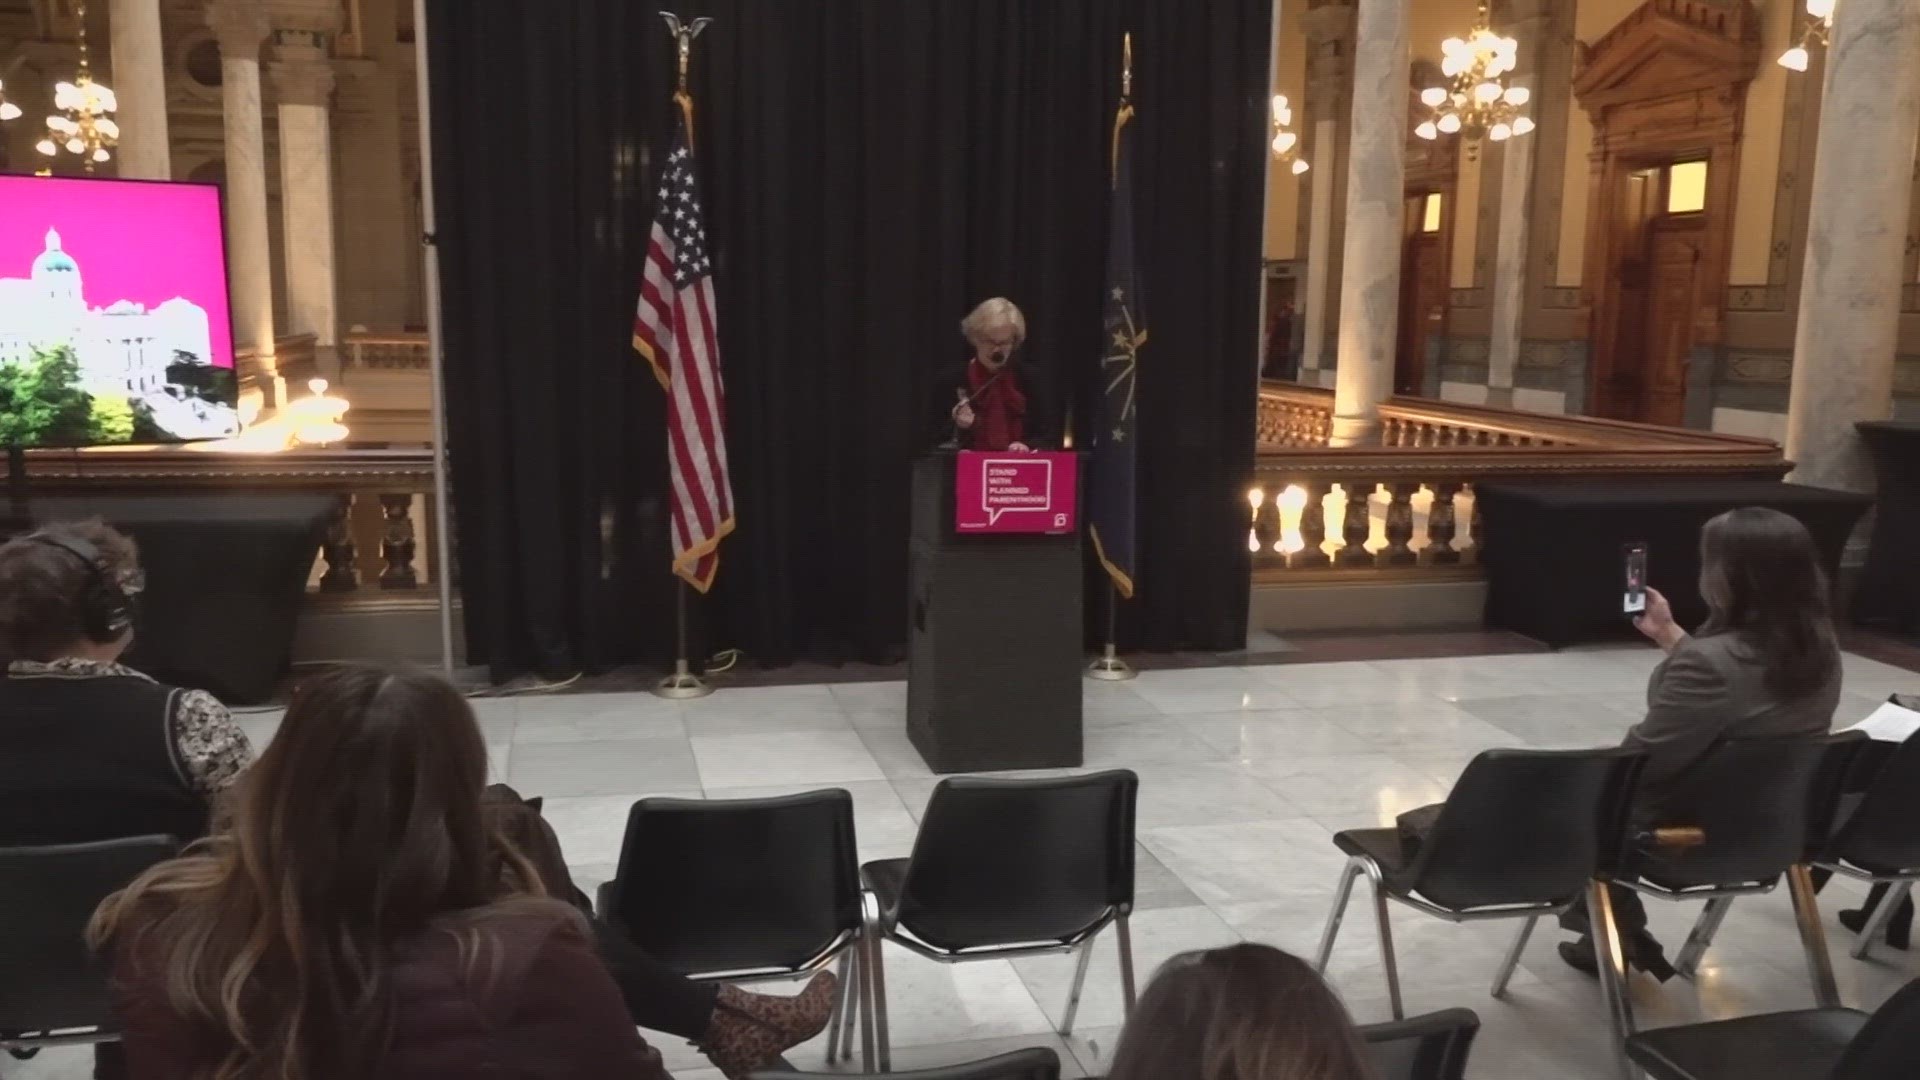 Senate bill 208 would allow abortion clinics to reopen and remove the eight week limitation on the use of an abortion inducing drug among other things.